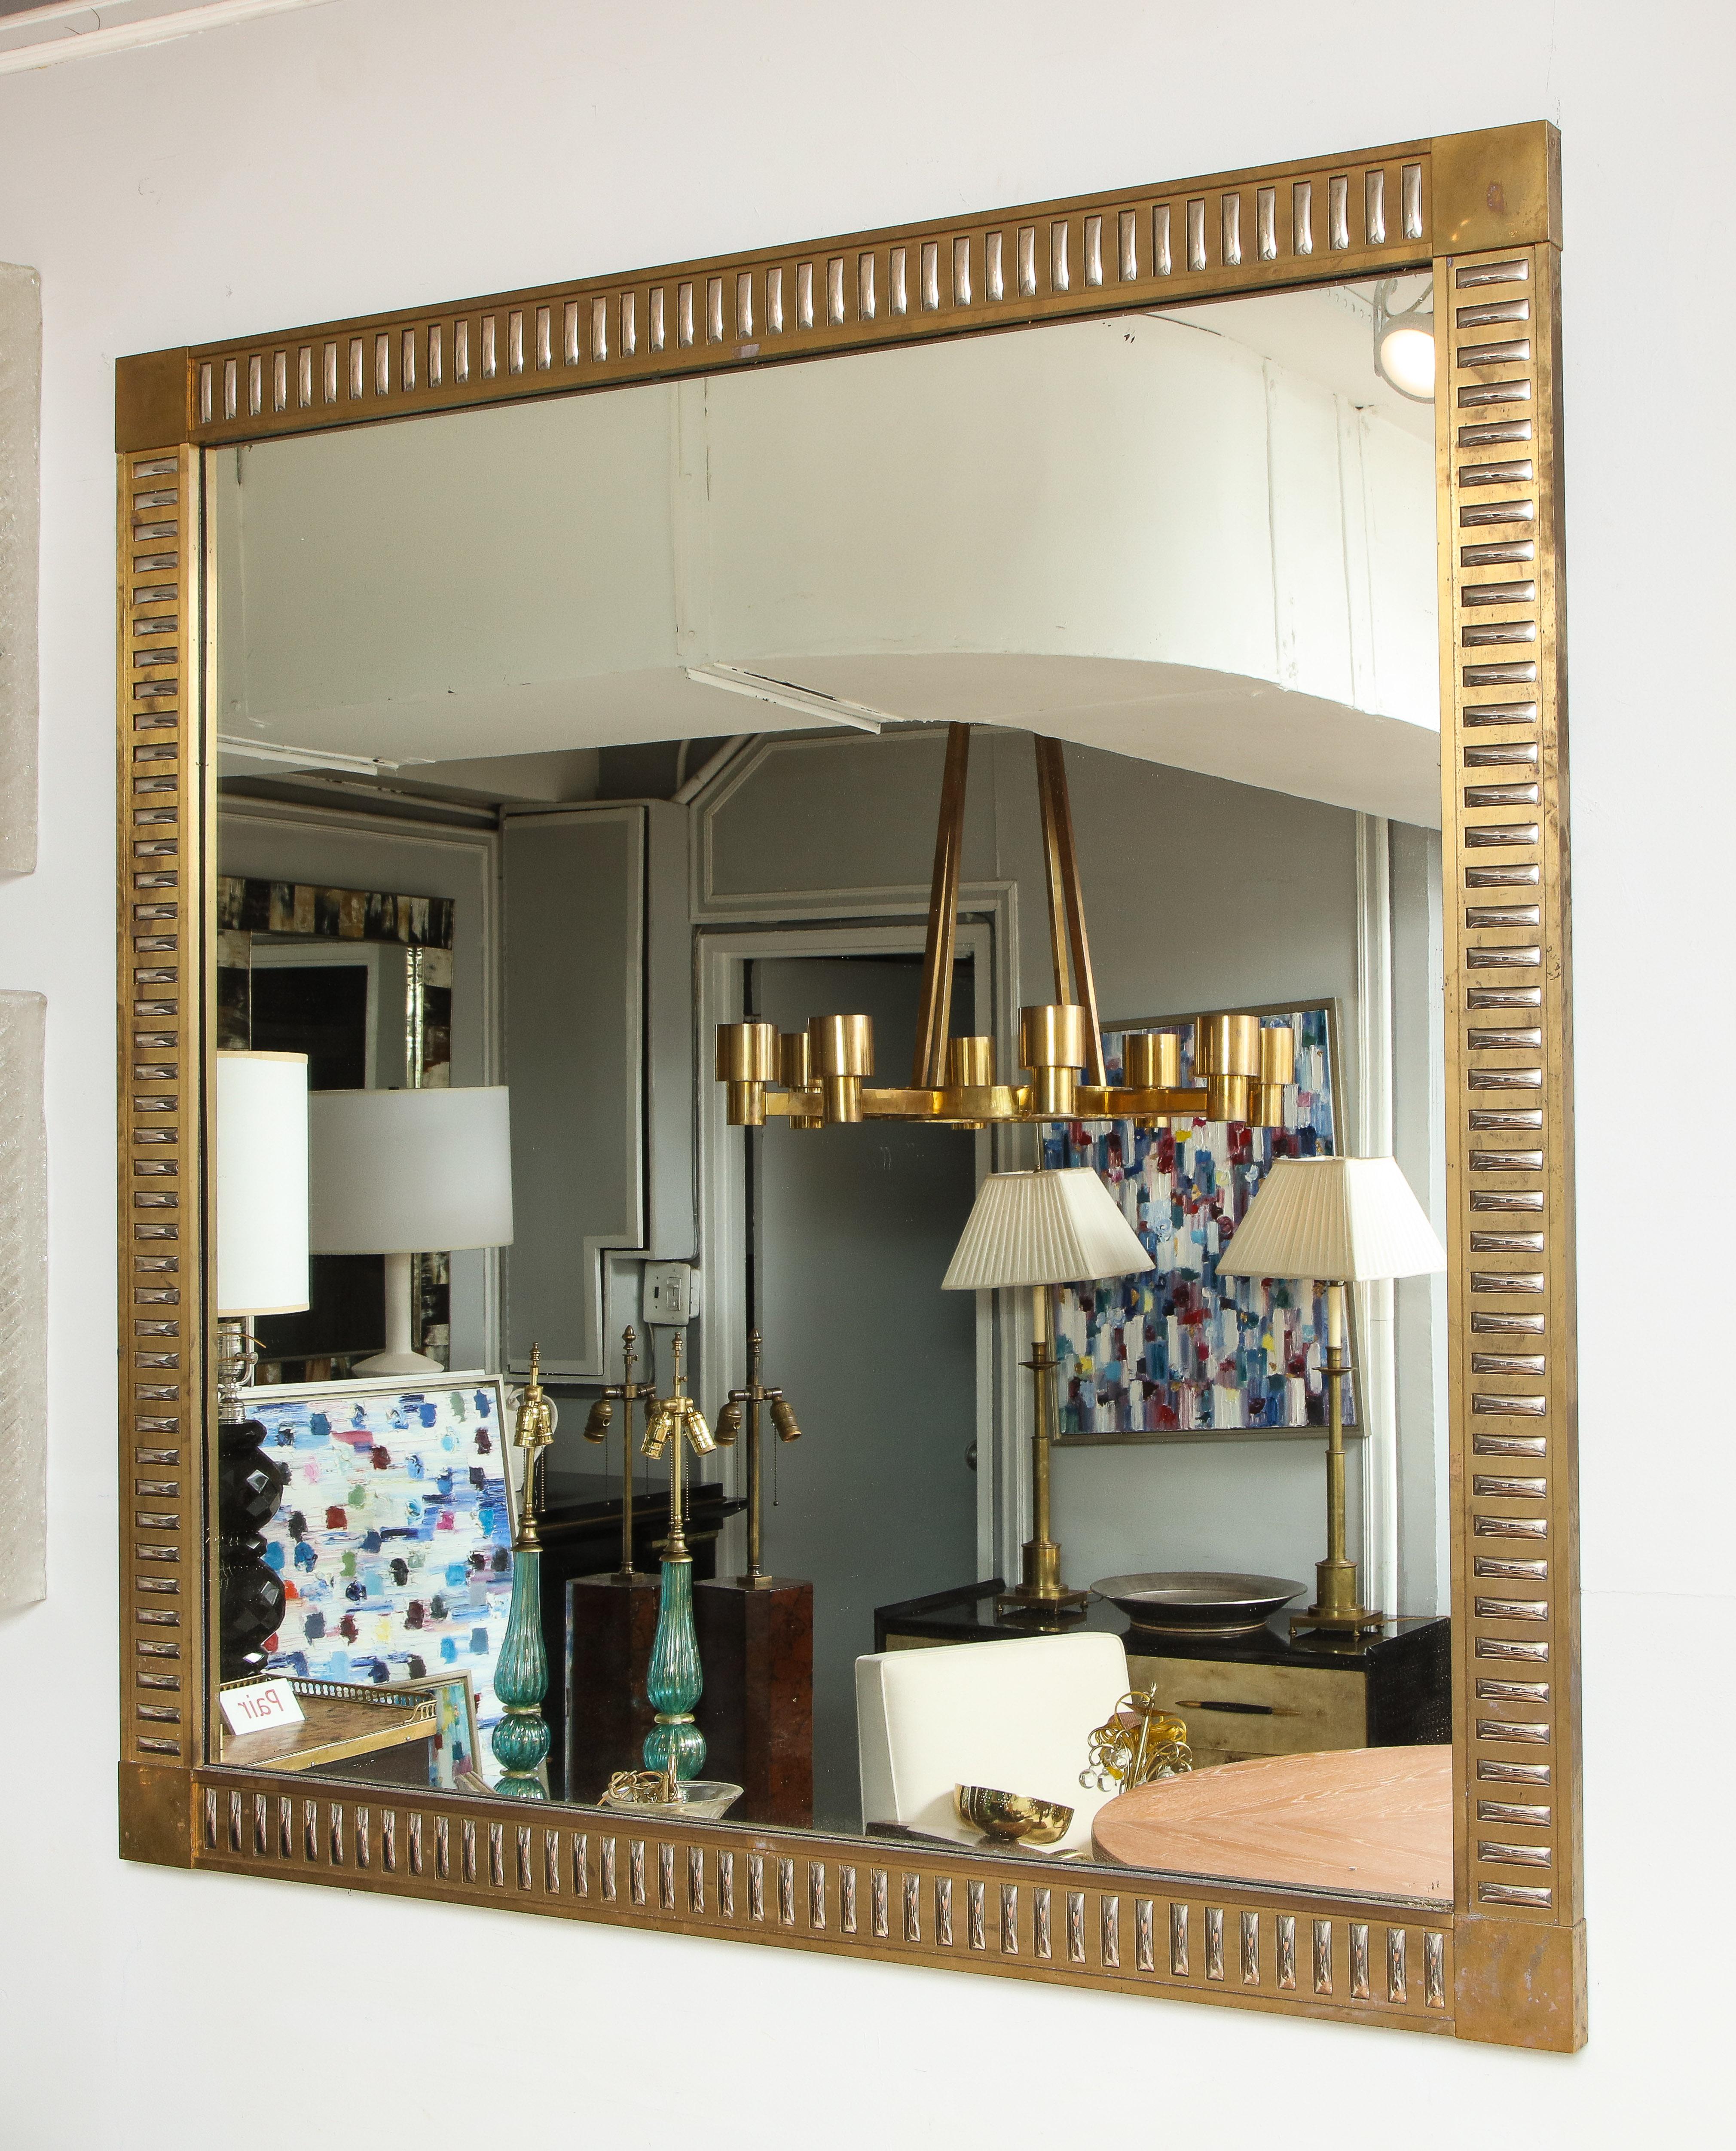 Rectangular bronze mirror with chrome inserts in the neoclassic manner.